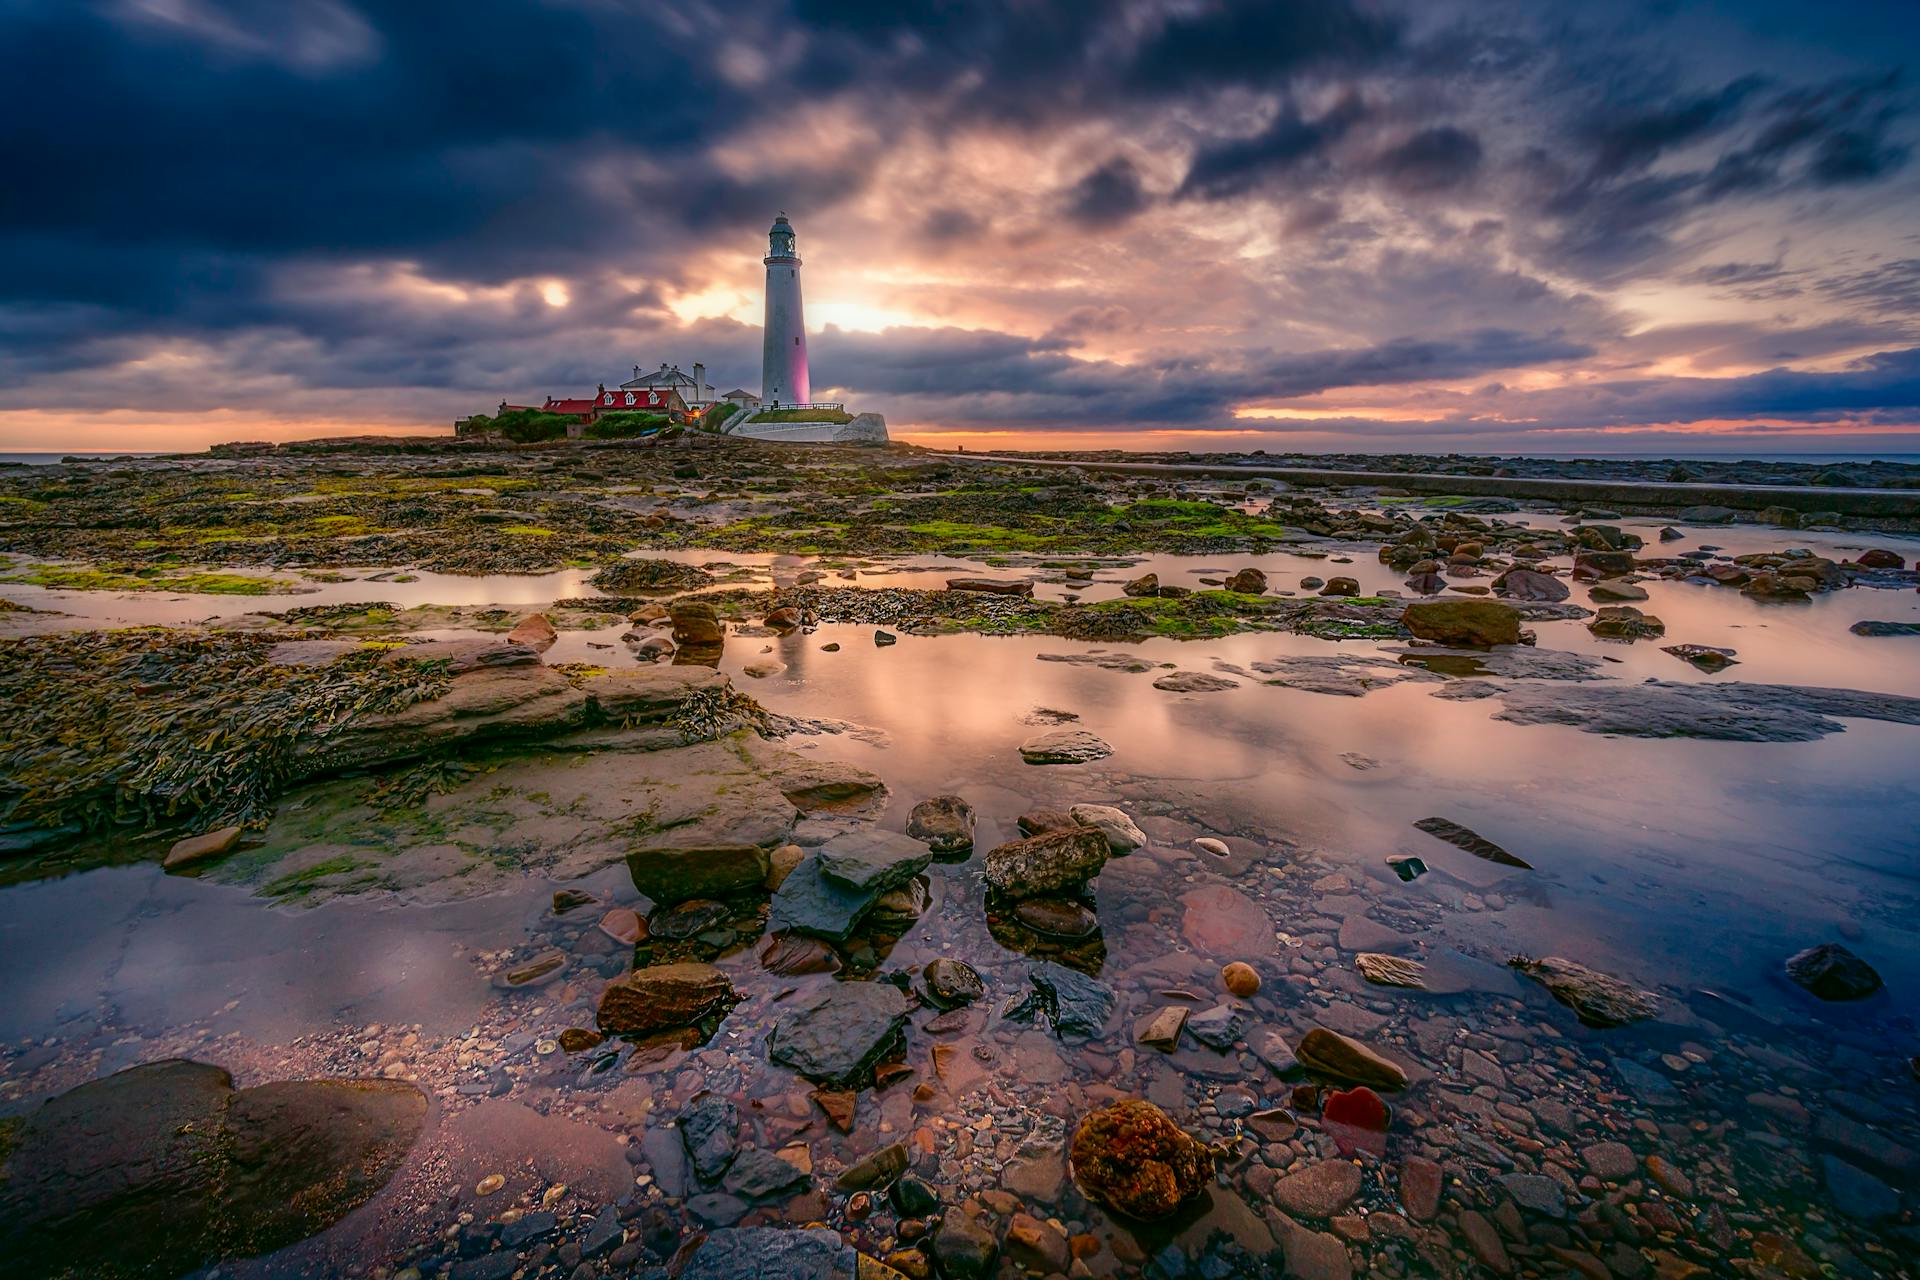 Landscape Photography of White Lighthouse during Cloudy Daytime